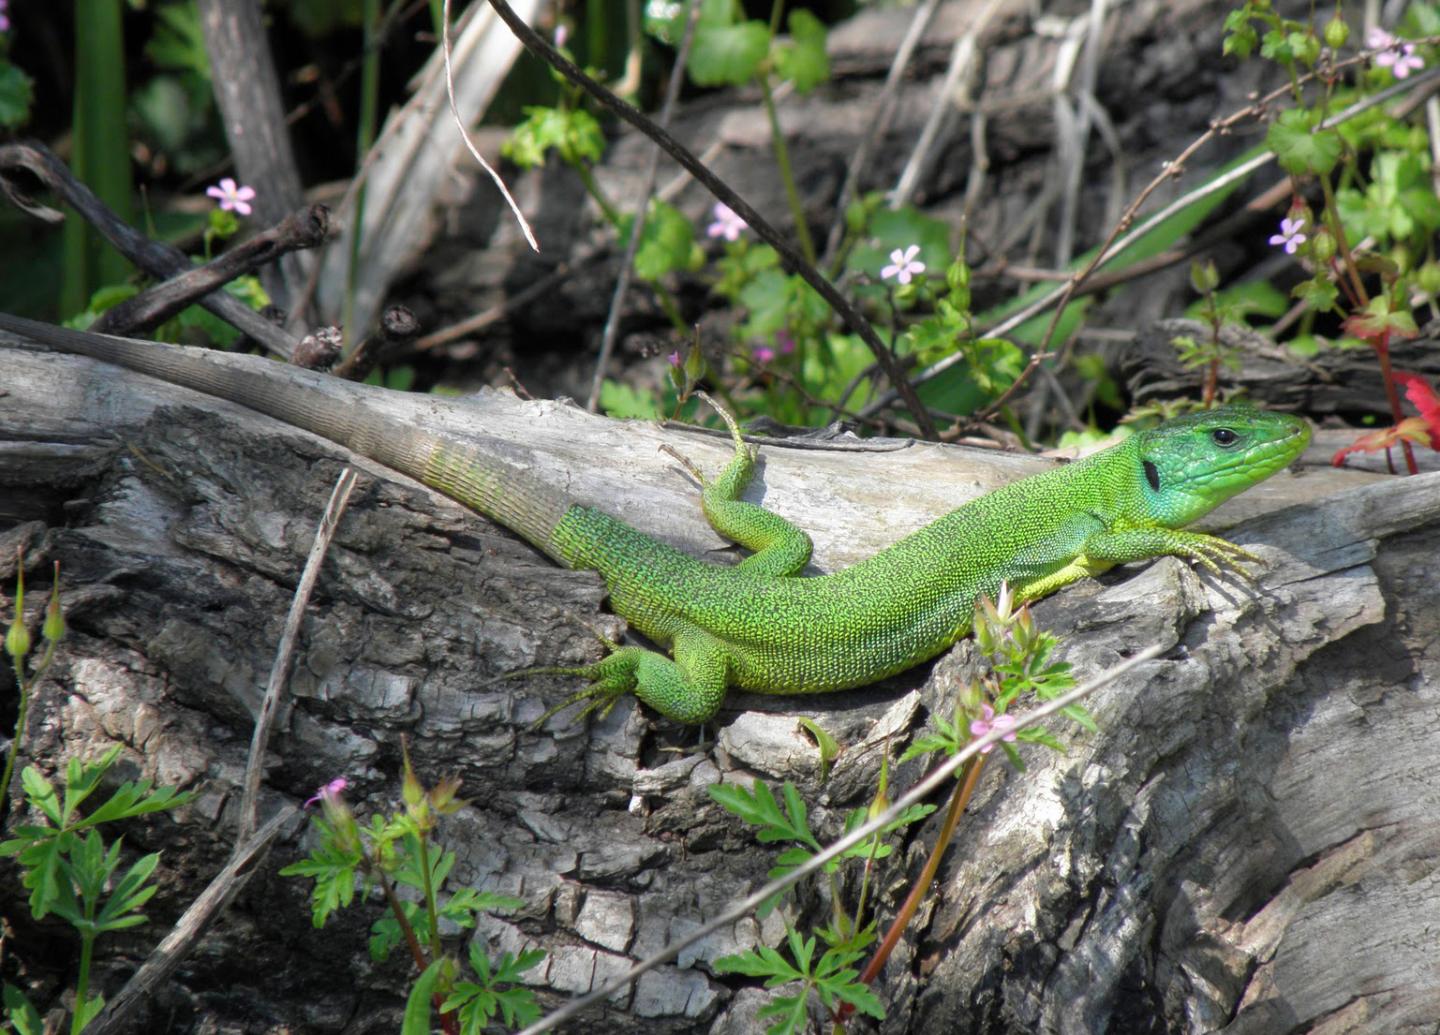 Lizards Can Stomach Island Living